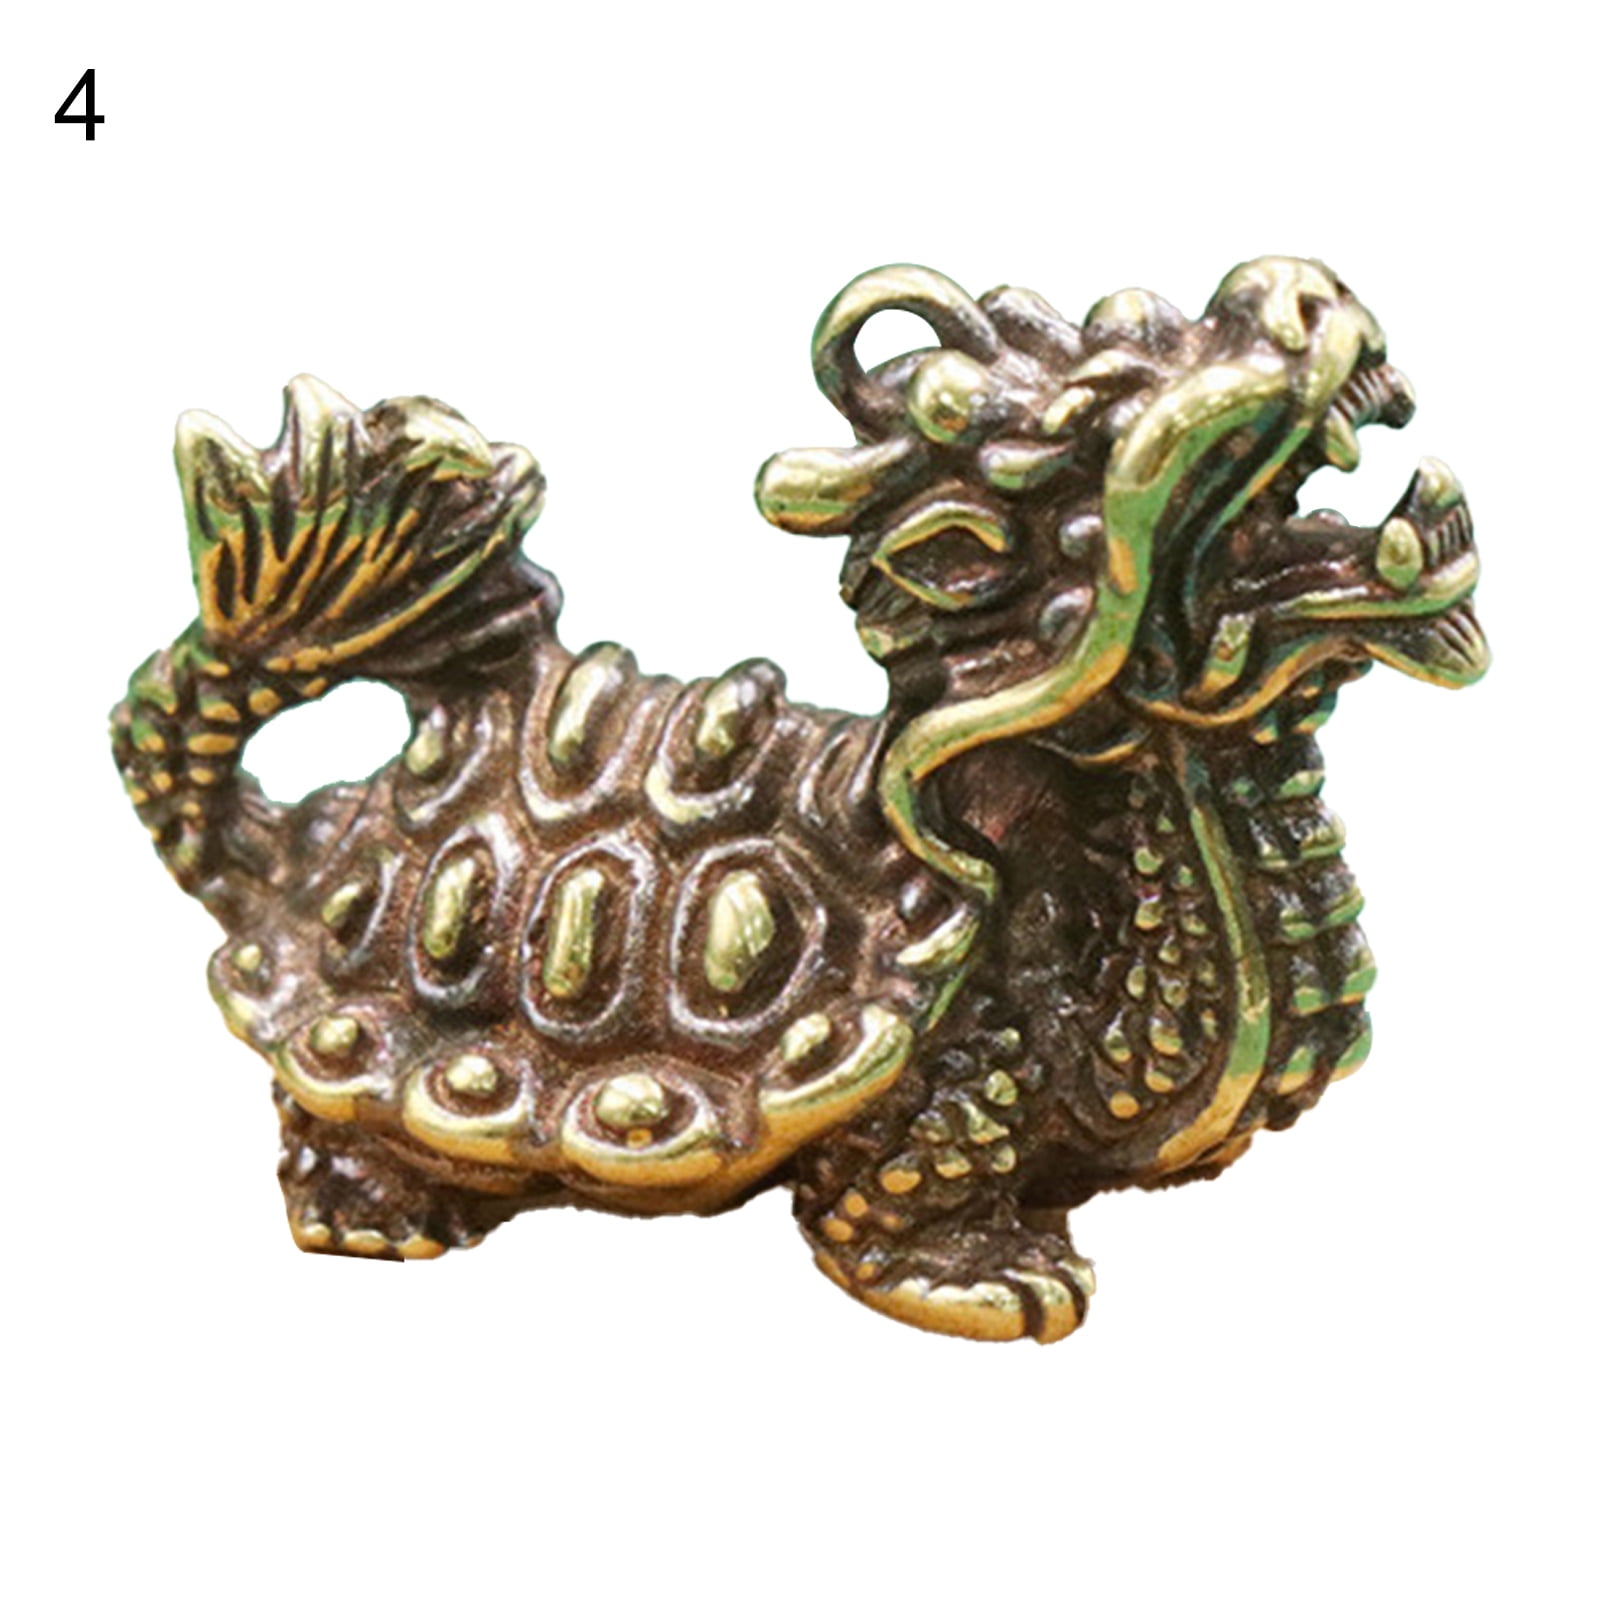 Creativity Chinese Dragon Calabash Gourd Statue Feng Shui Home Decor Ornaments 